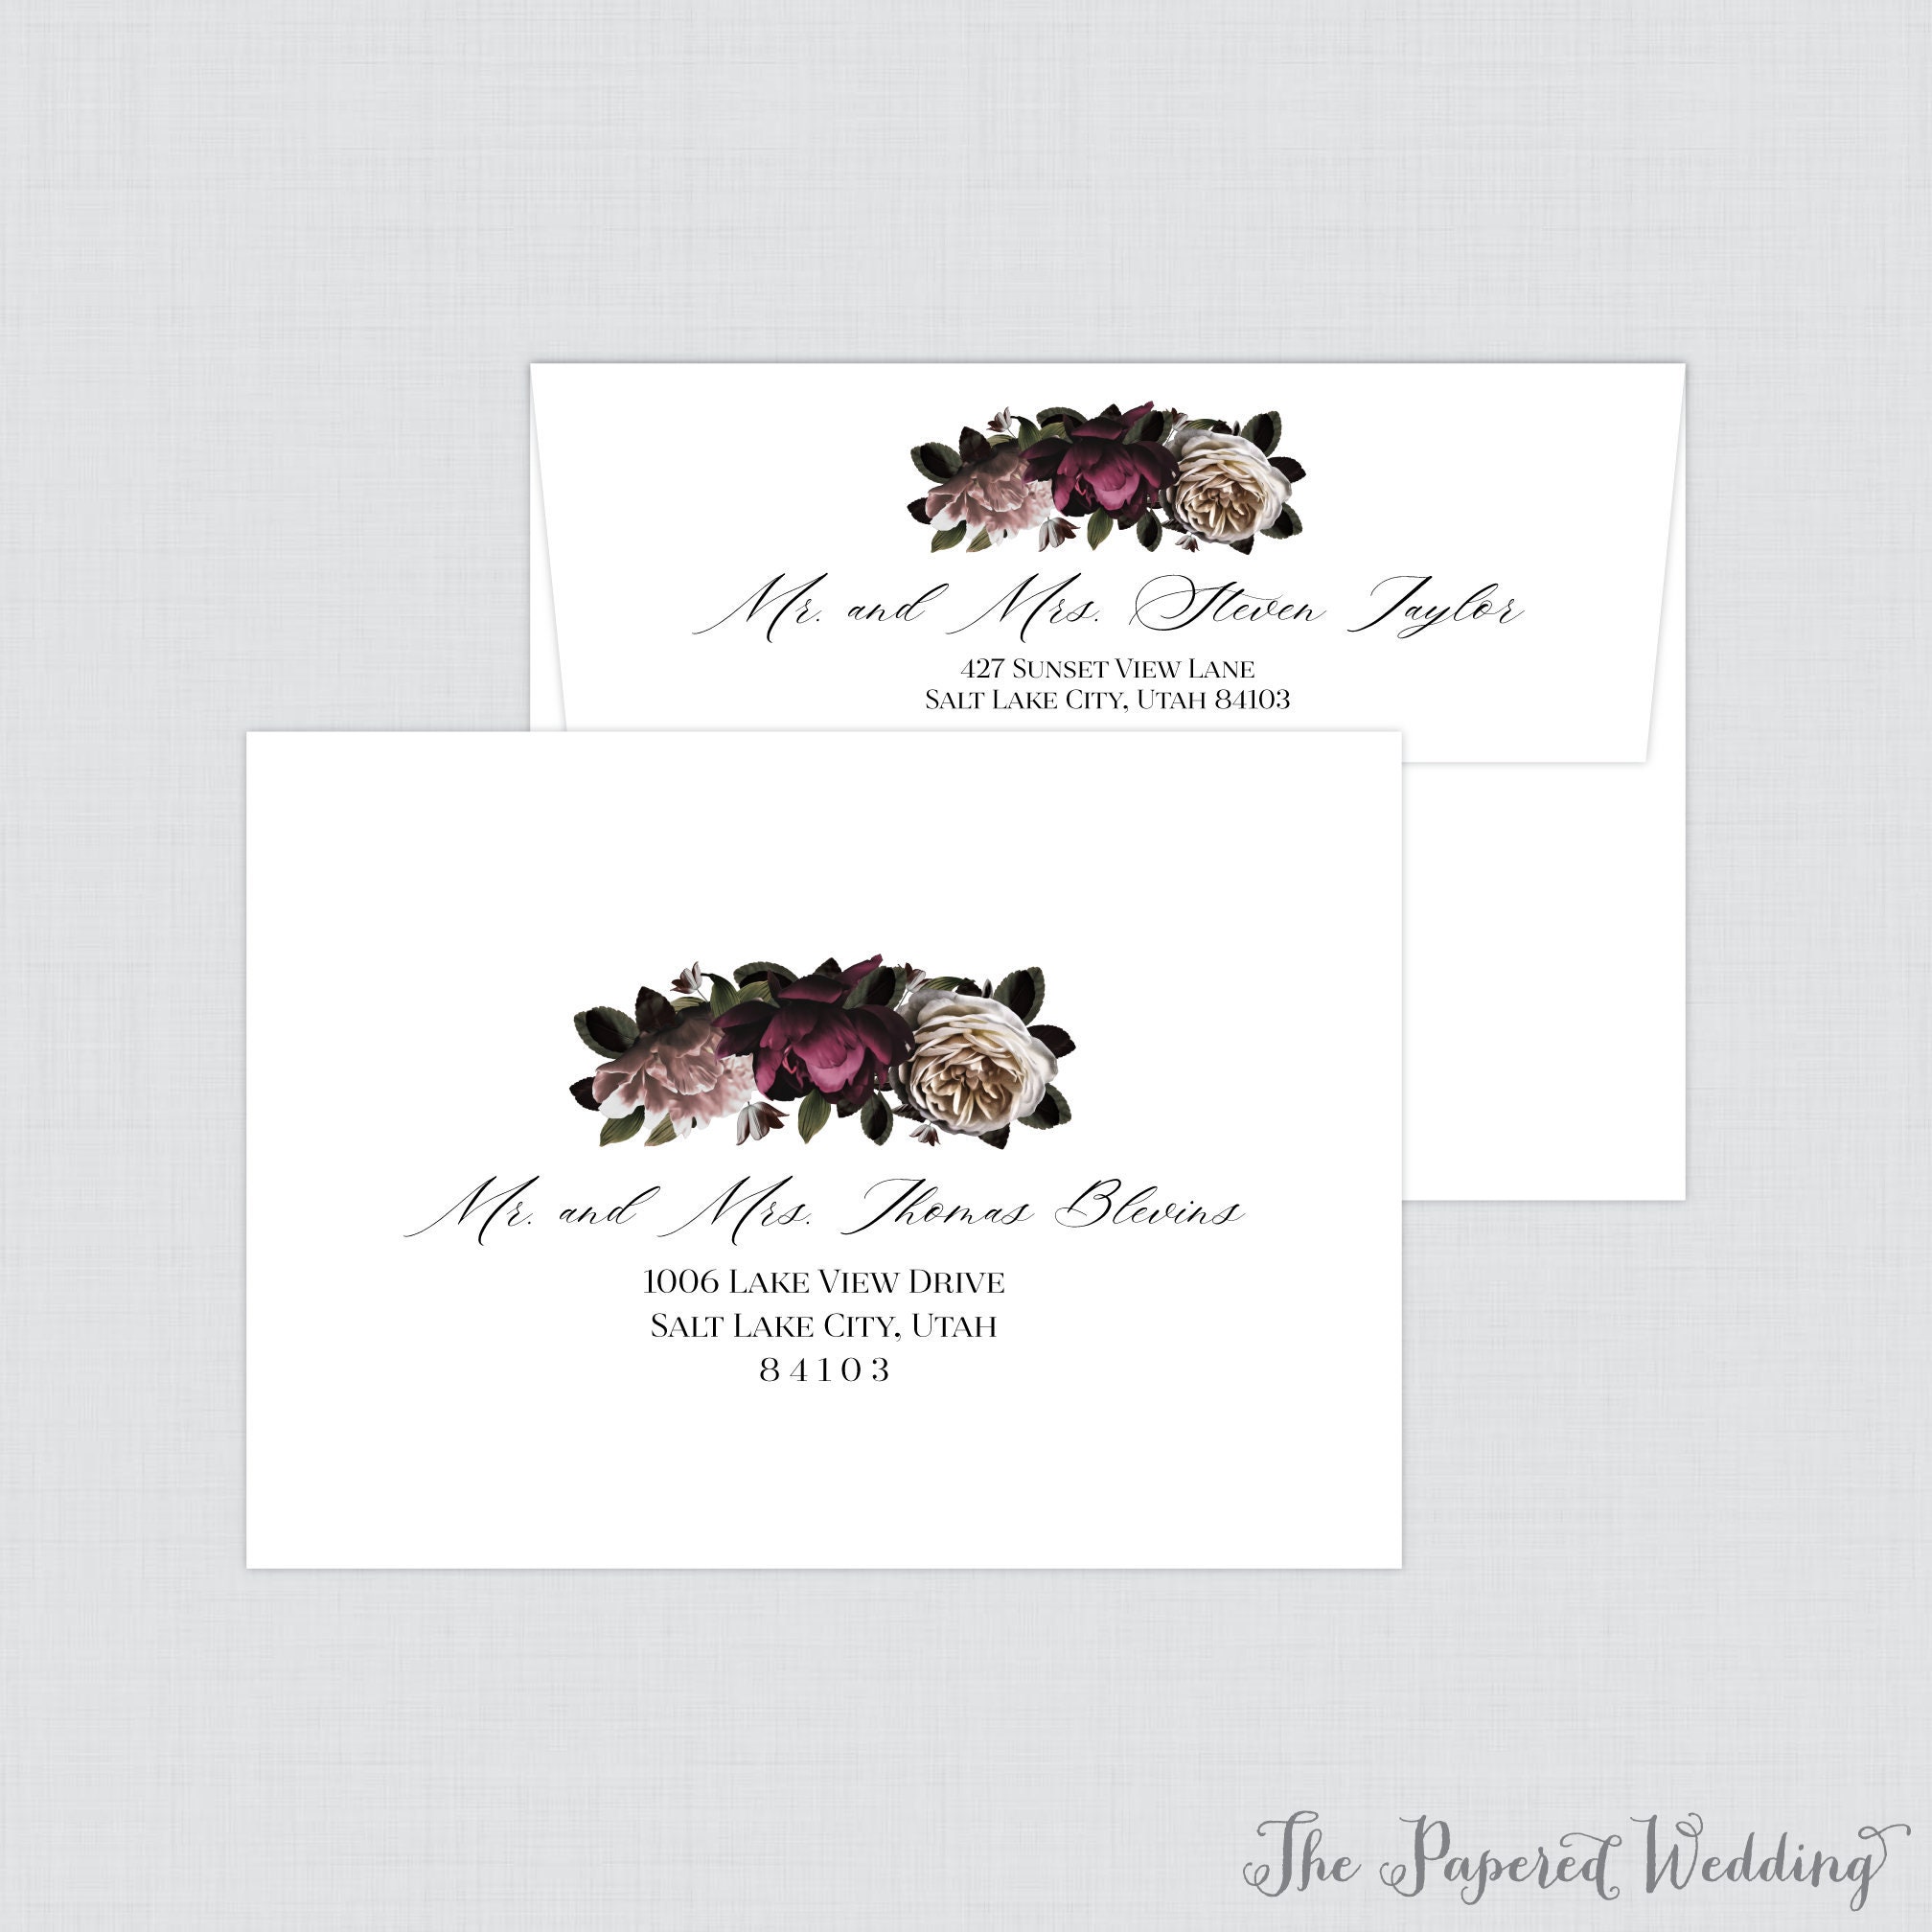 Floral Wedding Envelopes - Printed With Burgundy, Pink, & Ivory Flowers Moody Personalized Guest Addressing 0025